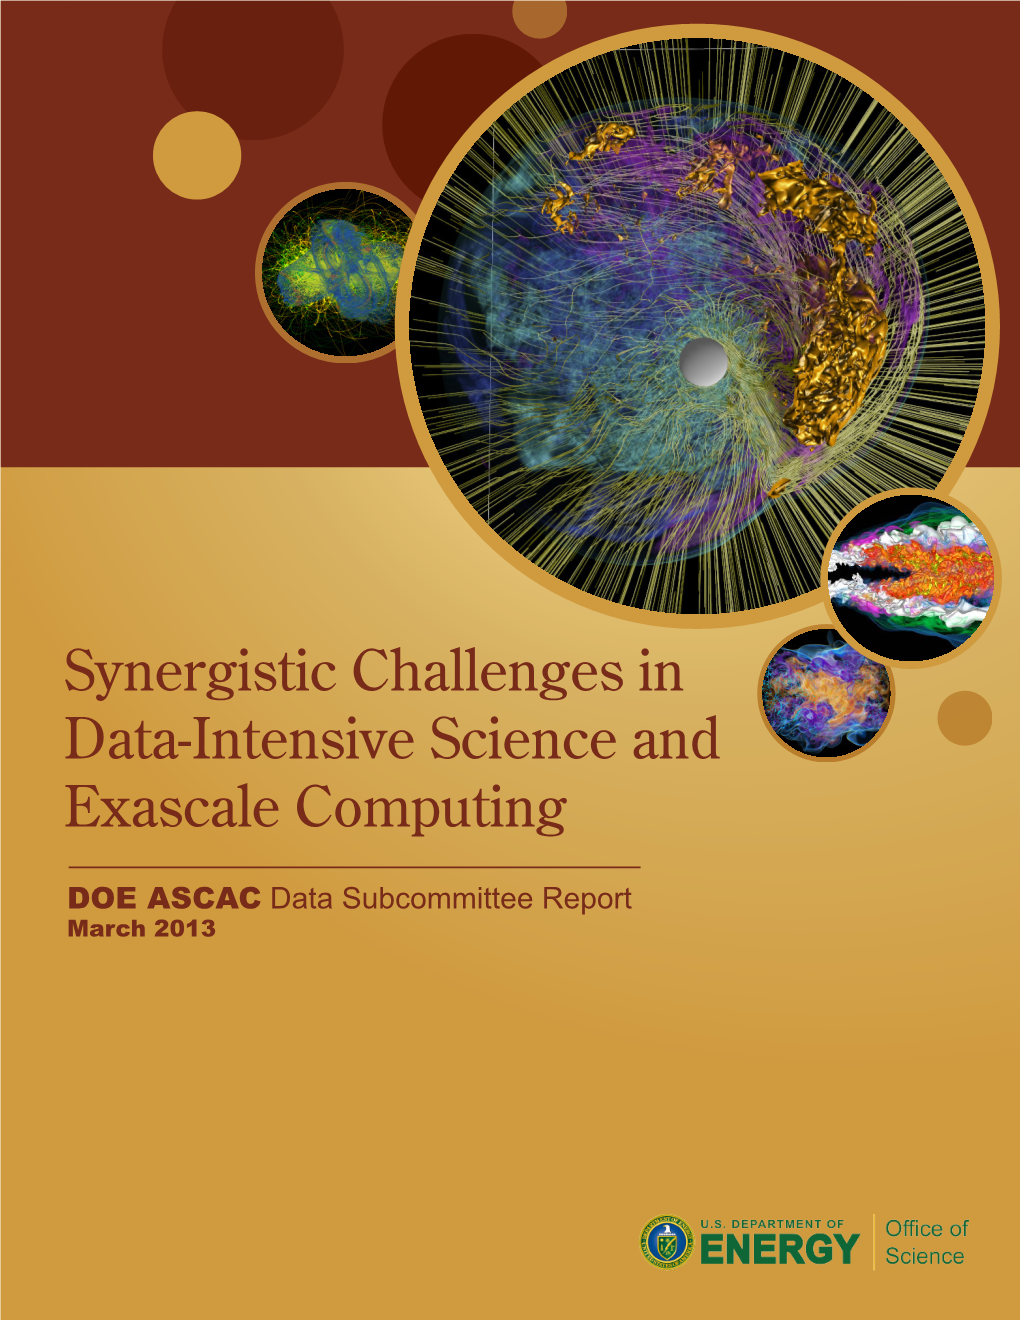 Synergistic Challenges in Data-Intensive Science and Exascale Computing